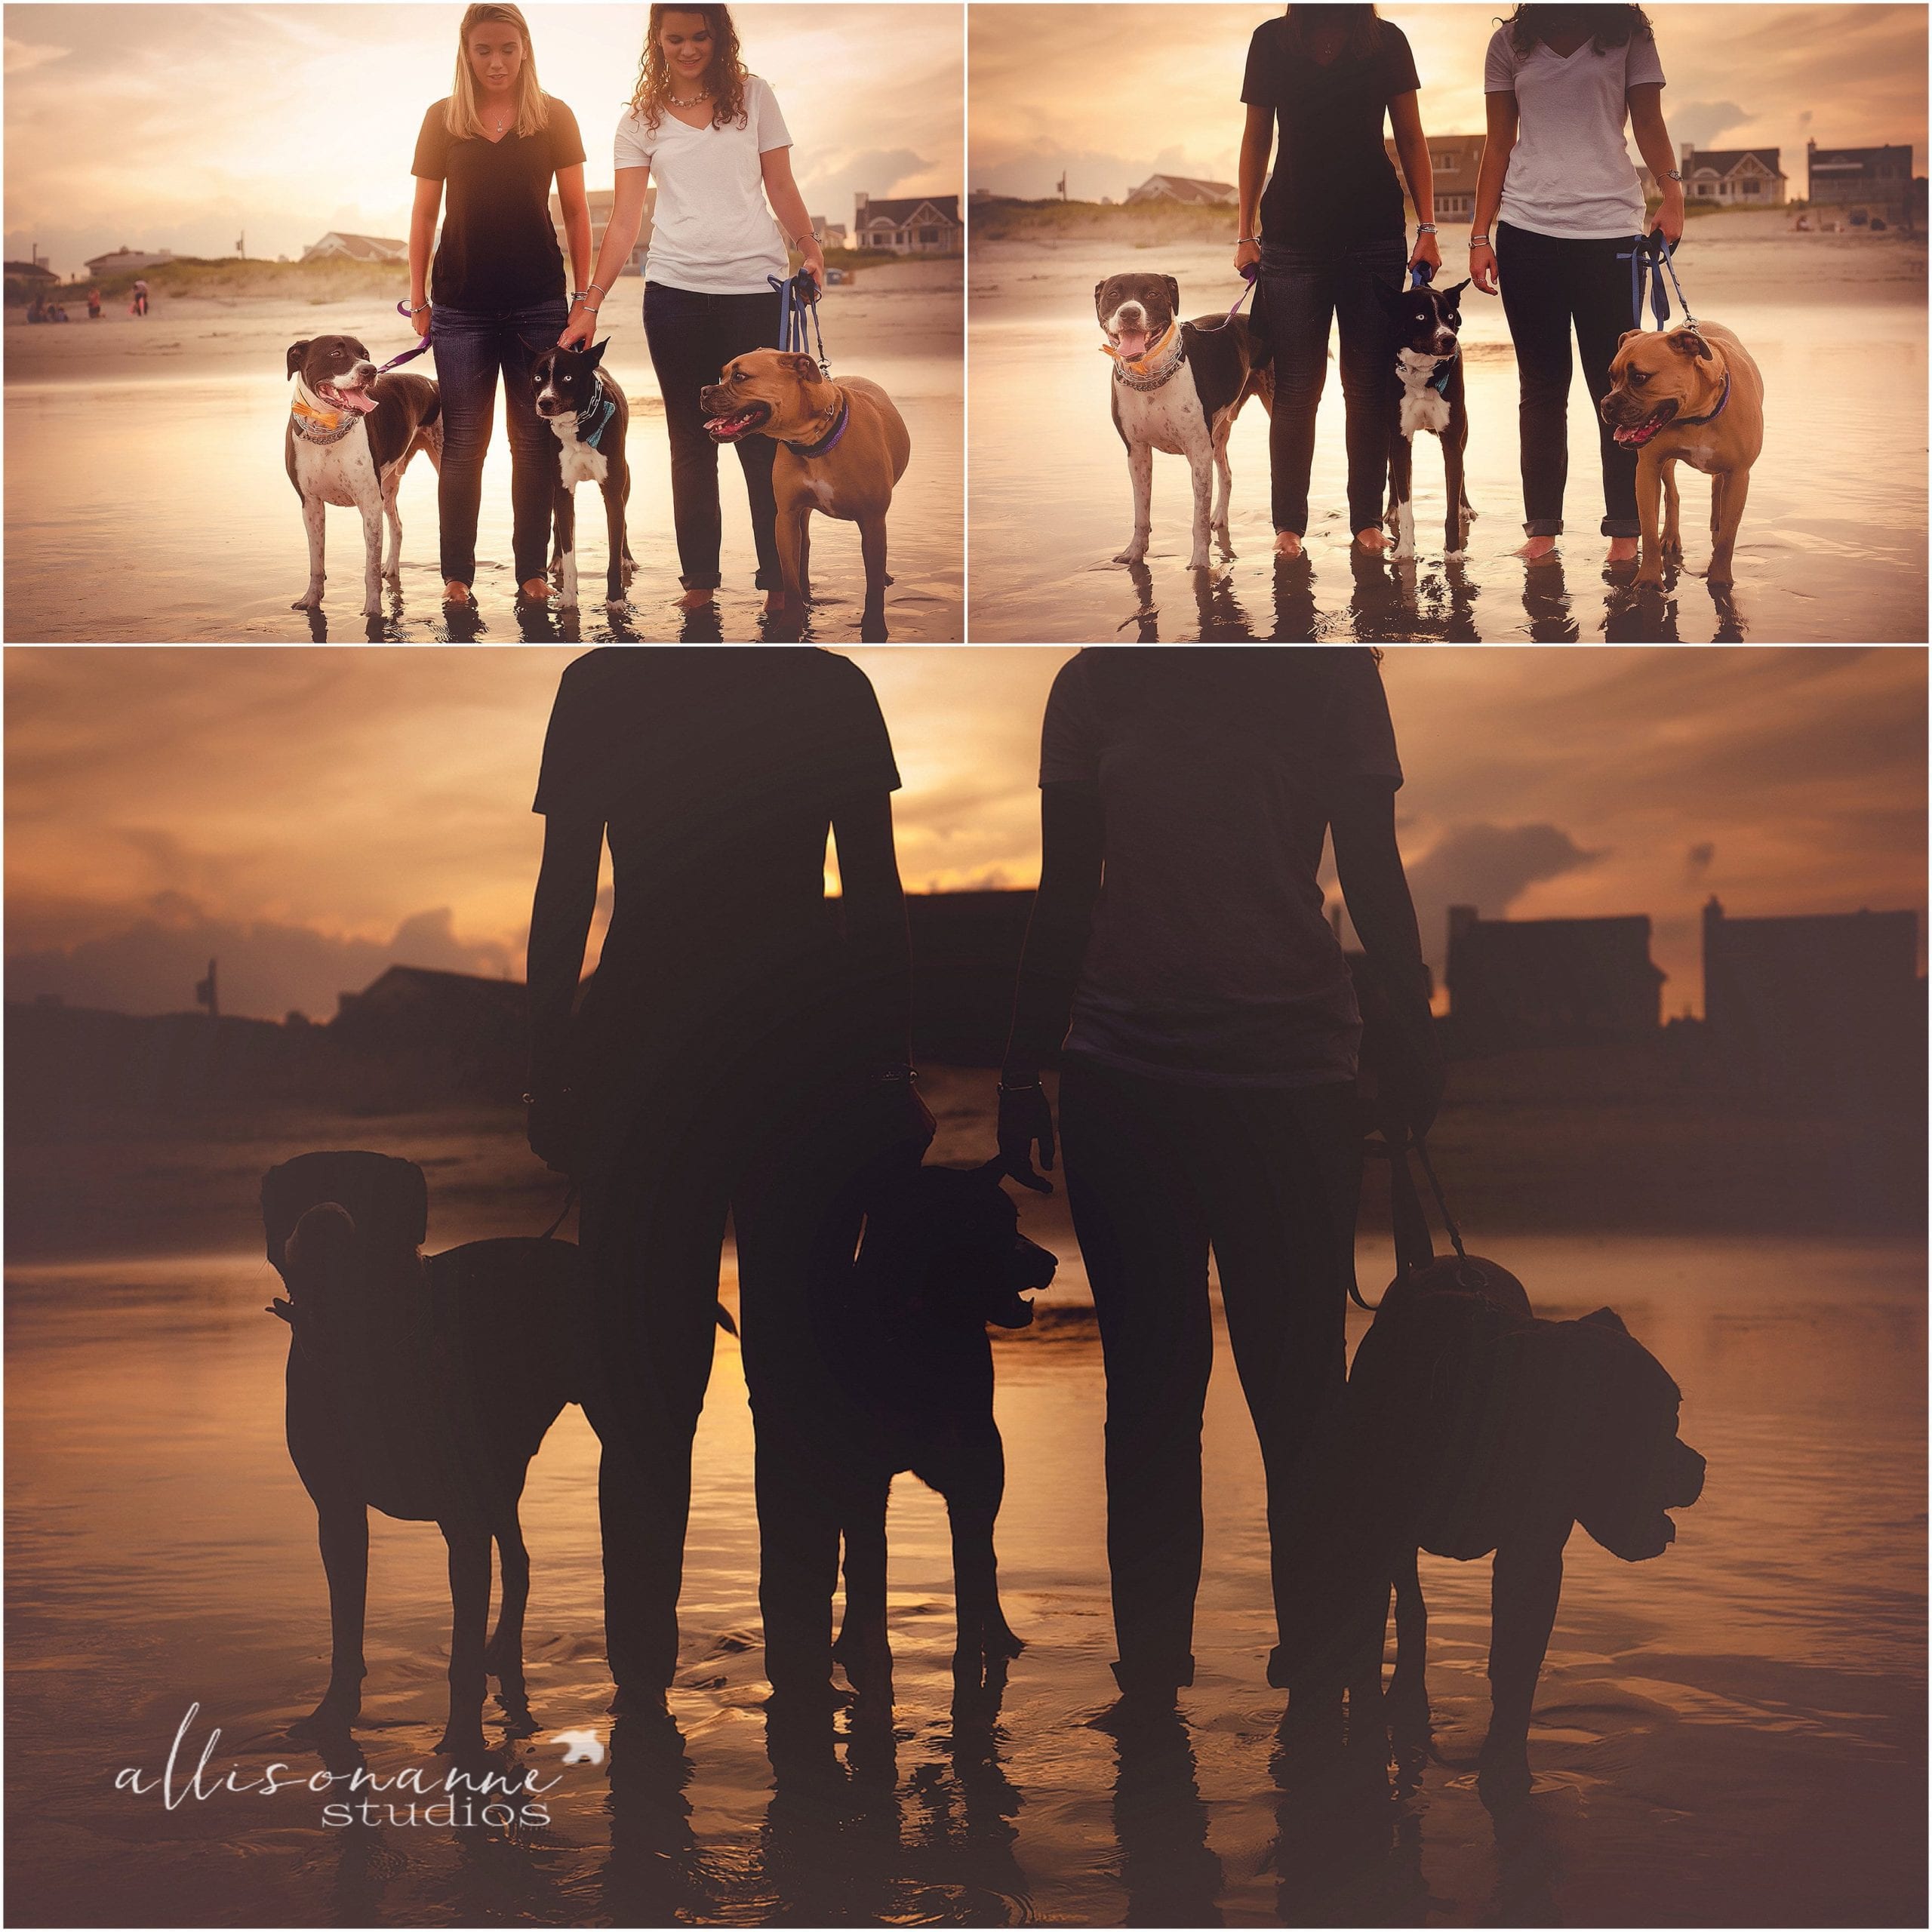 rescue dogs, 58th St. Beach, daughters, sisters, loyalty, AllisonAnne Studios, Hammonton, sunset, Allison Gallagher, Best Photographer, South Jersey, woof